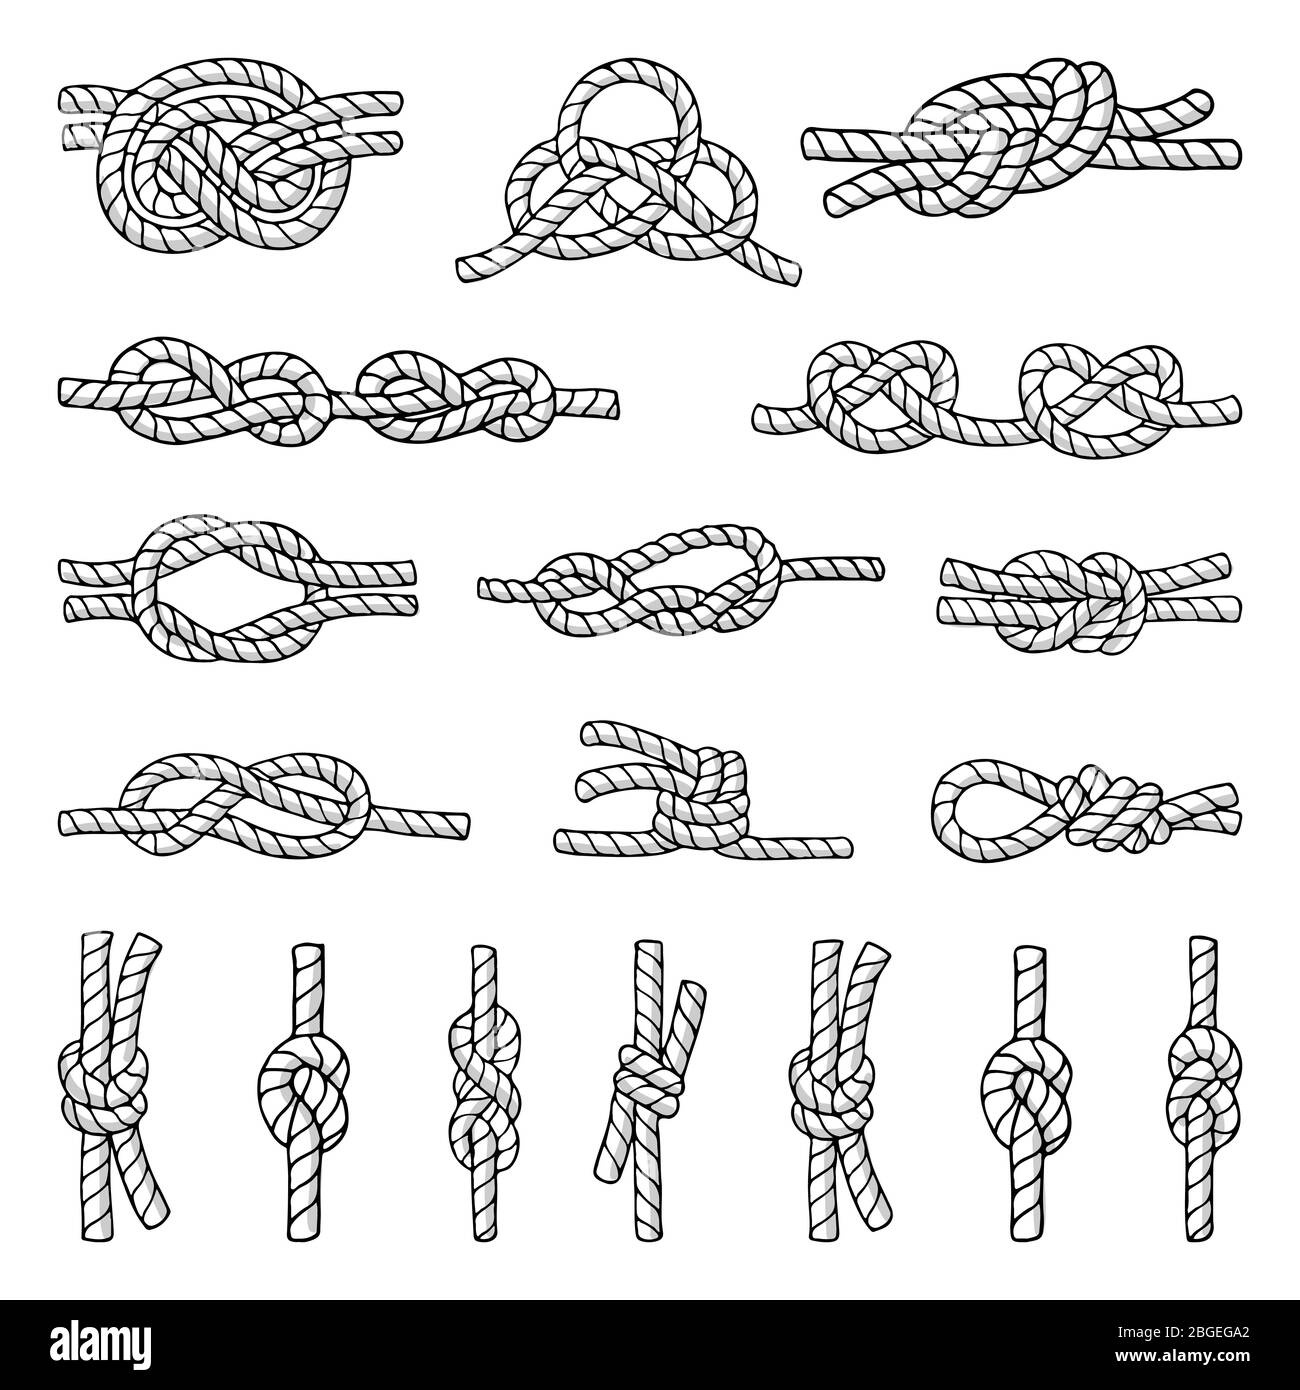 Illustrations of different nautical knots and nodes. Cordage icons set. Hand drawn pictures isolate on white Stock Vector